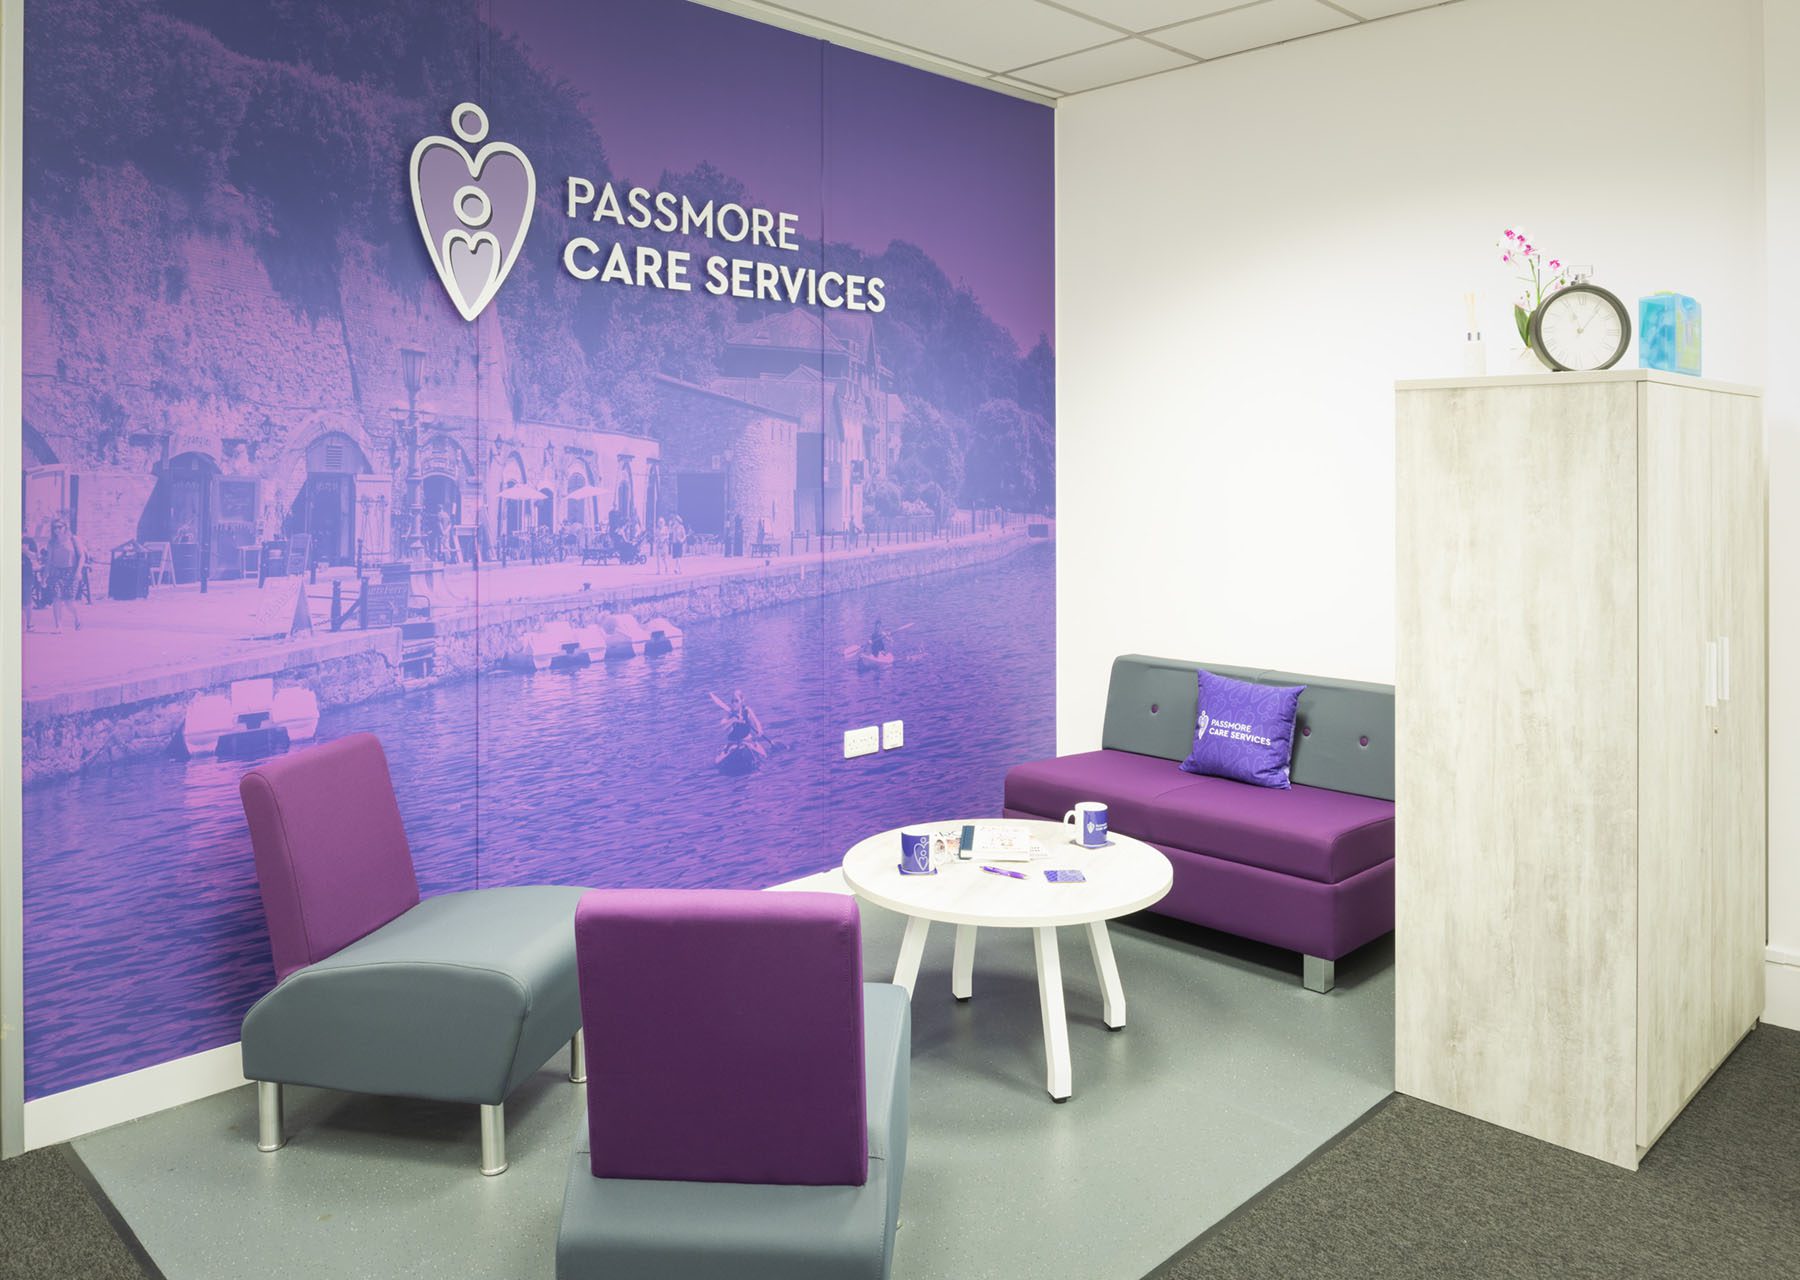 Passmore Care wall graphic with acrylic sign